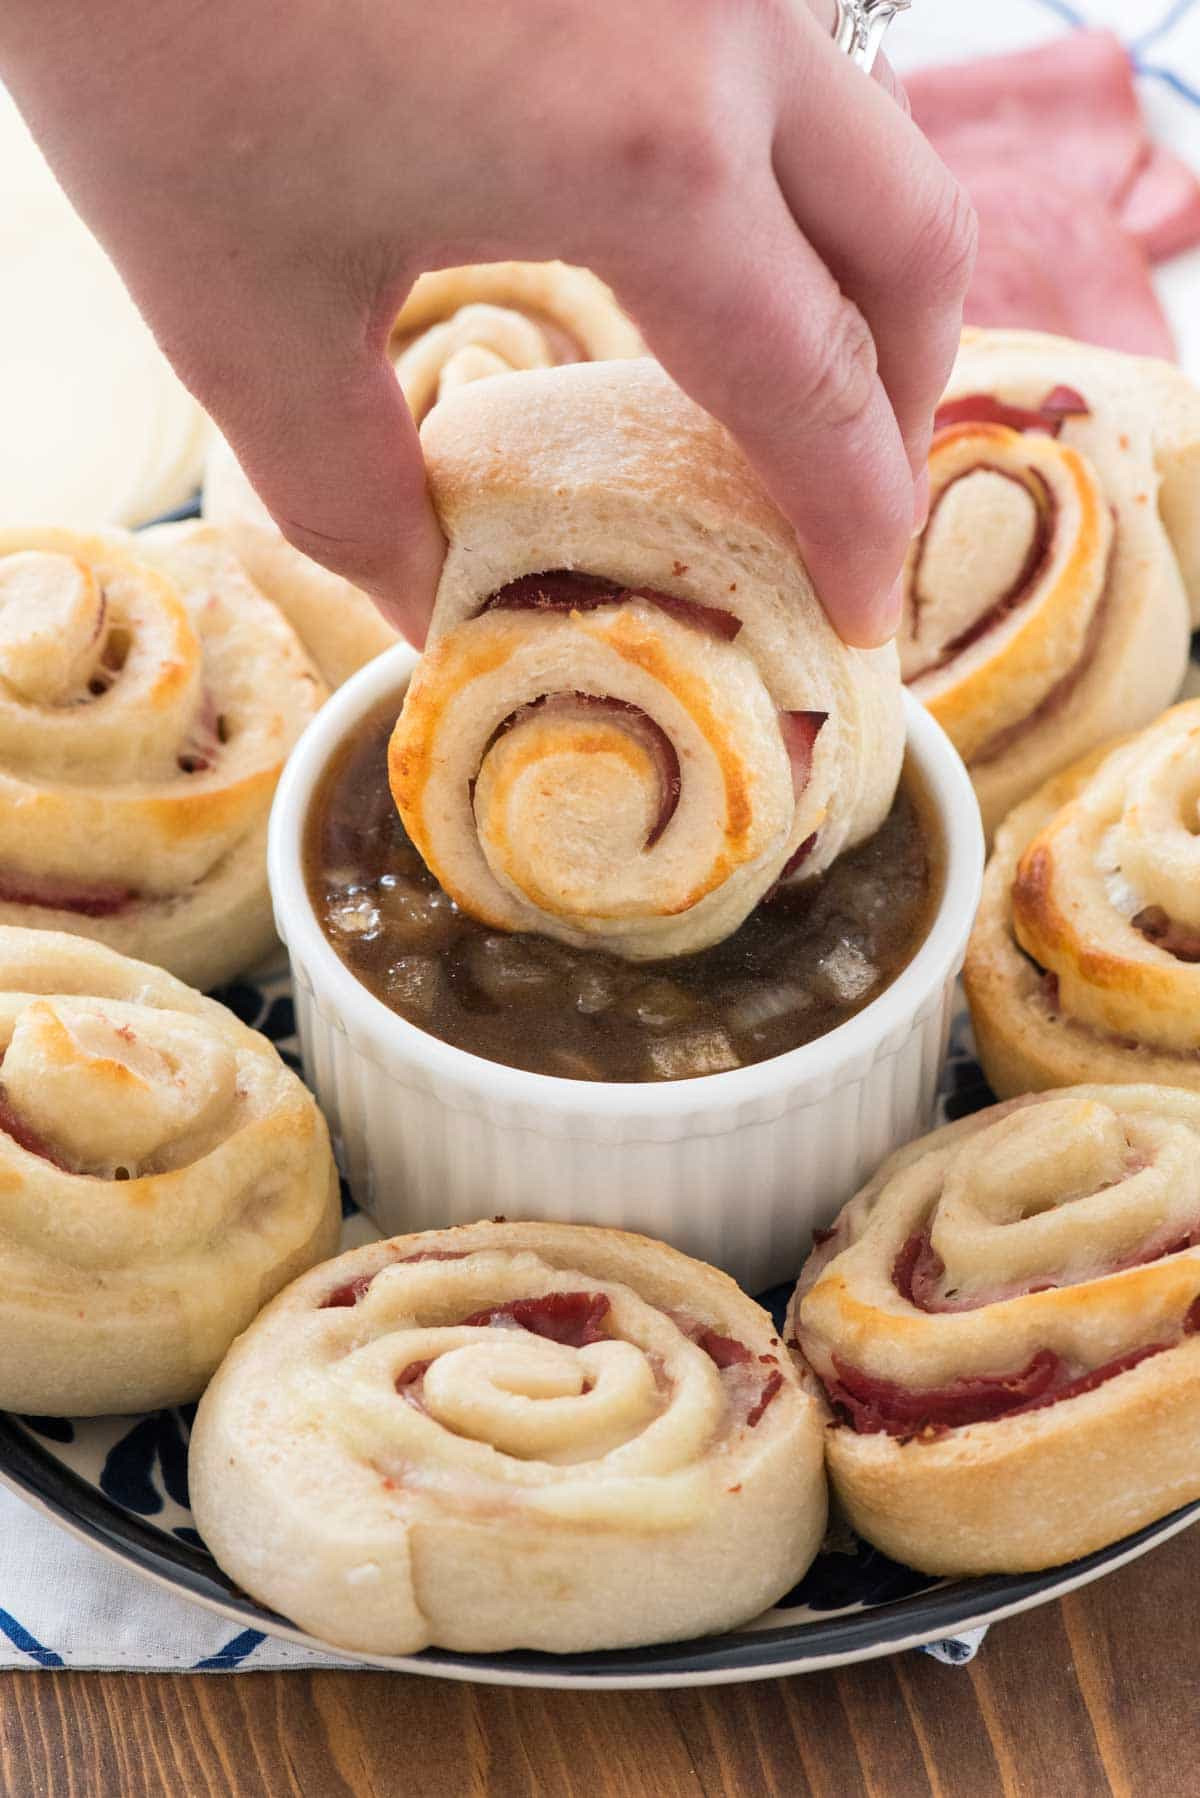 French Appetizer Recipes
 French Dip Pinwheels Appetizer Recipe